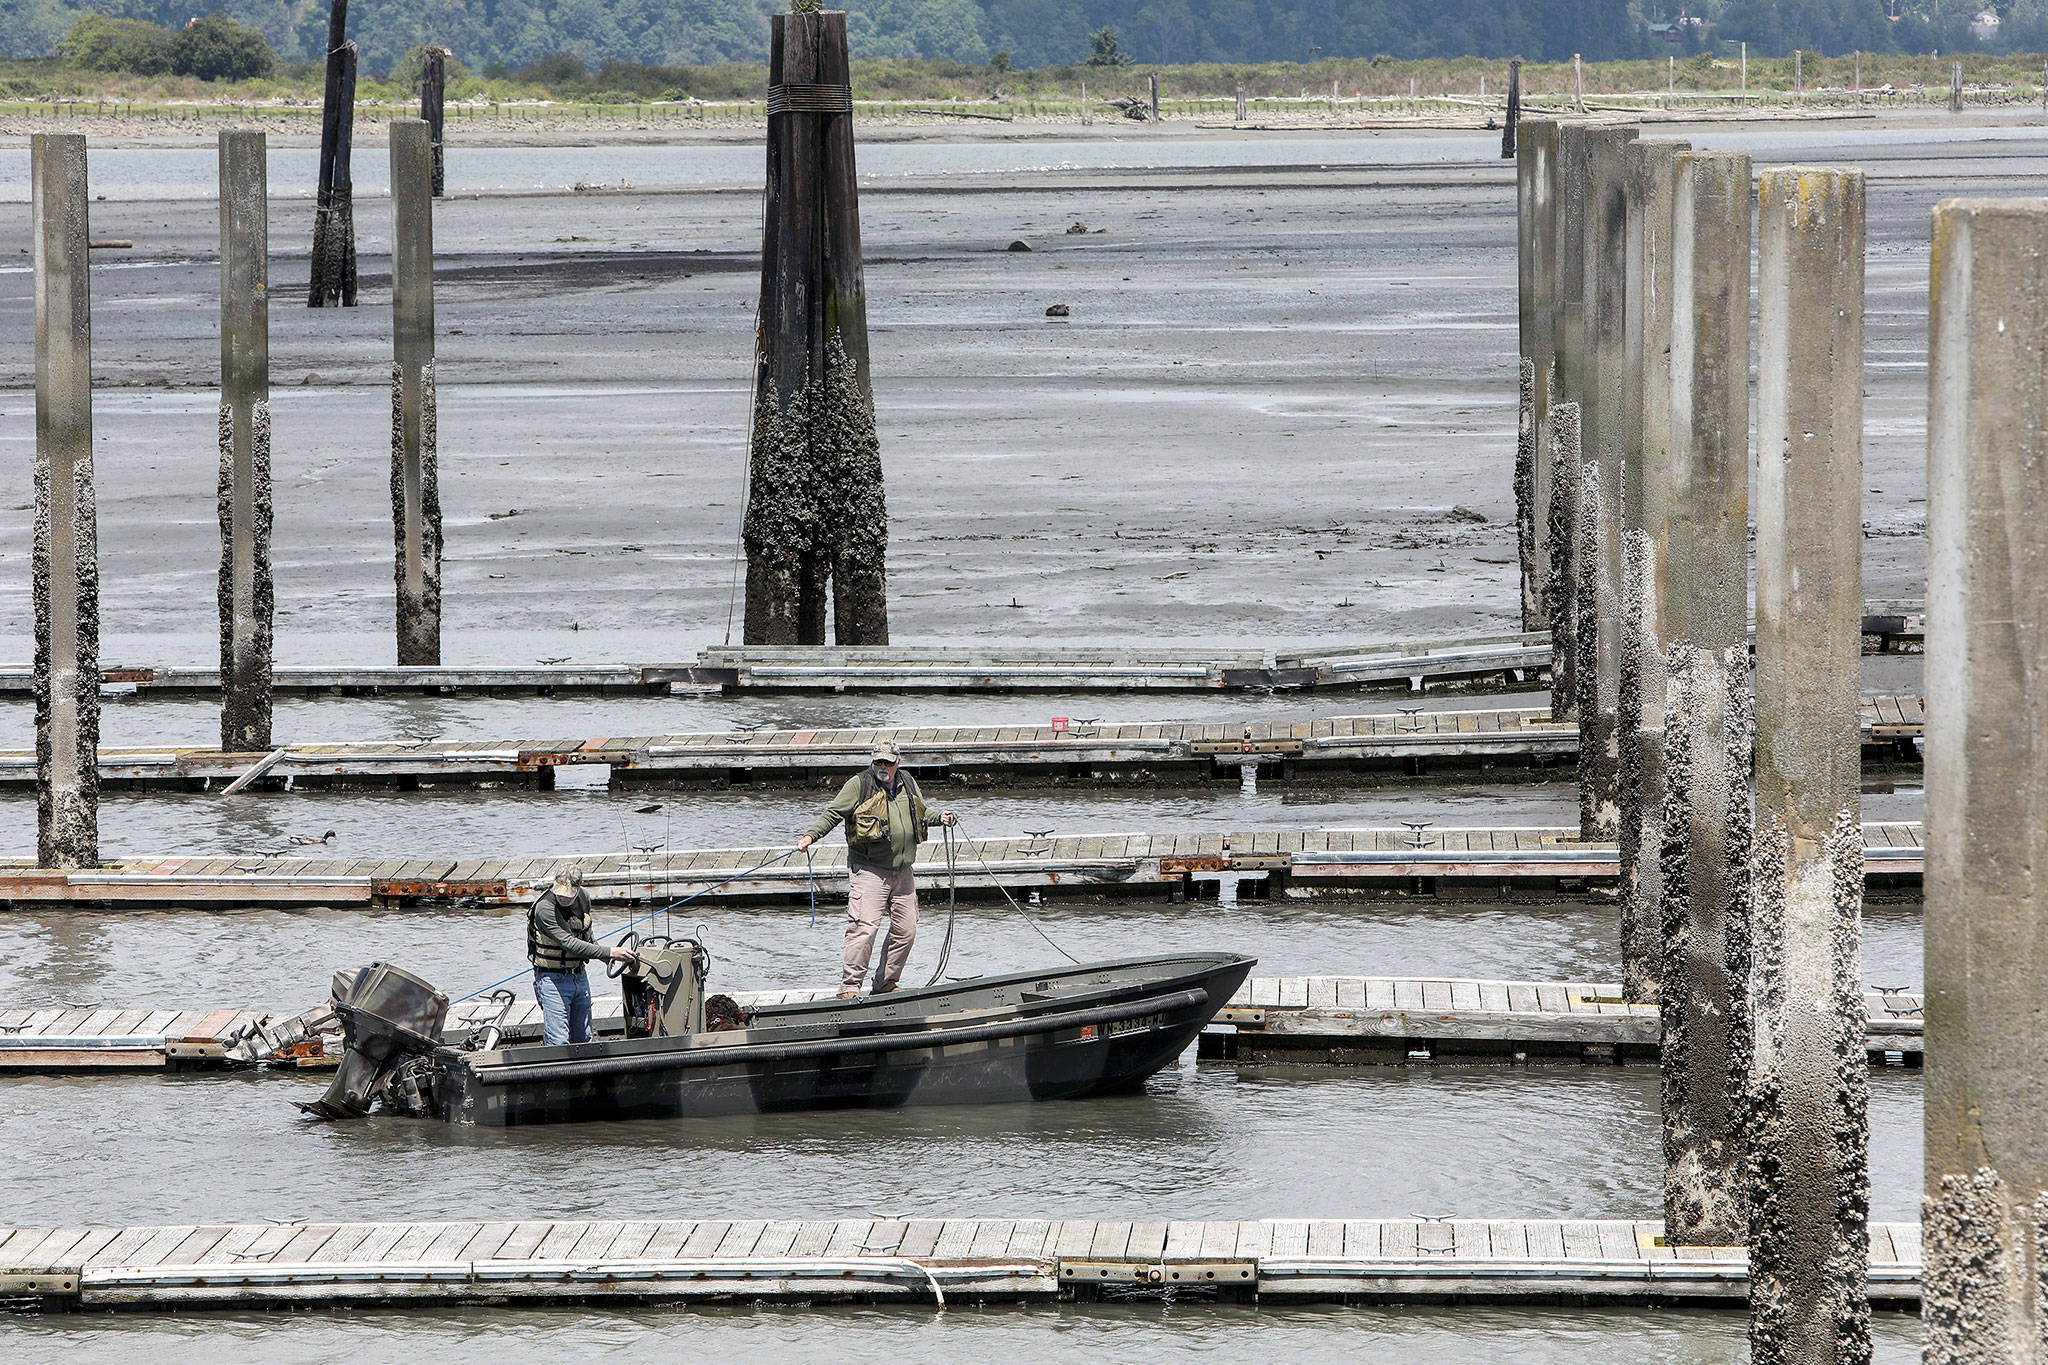 Ron Buckner (right) and Jim Fetzer struggle to make it back to the 10th Street Boat Launch during one of the lowest tides of the year. (Lizz Giordano / The Herald)